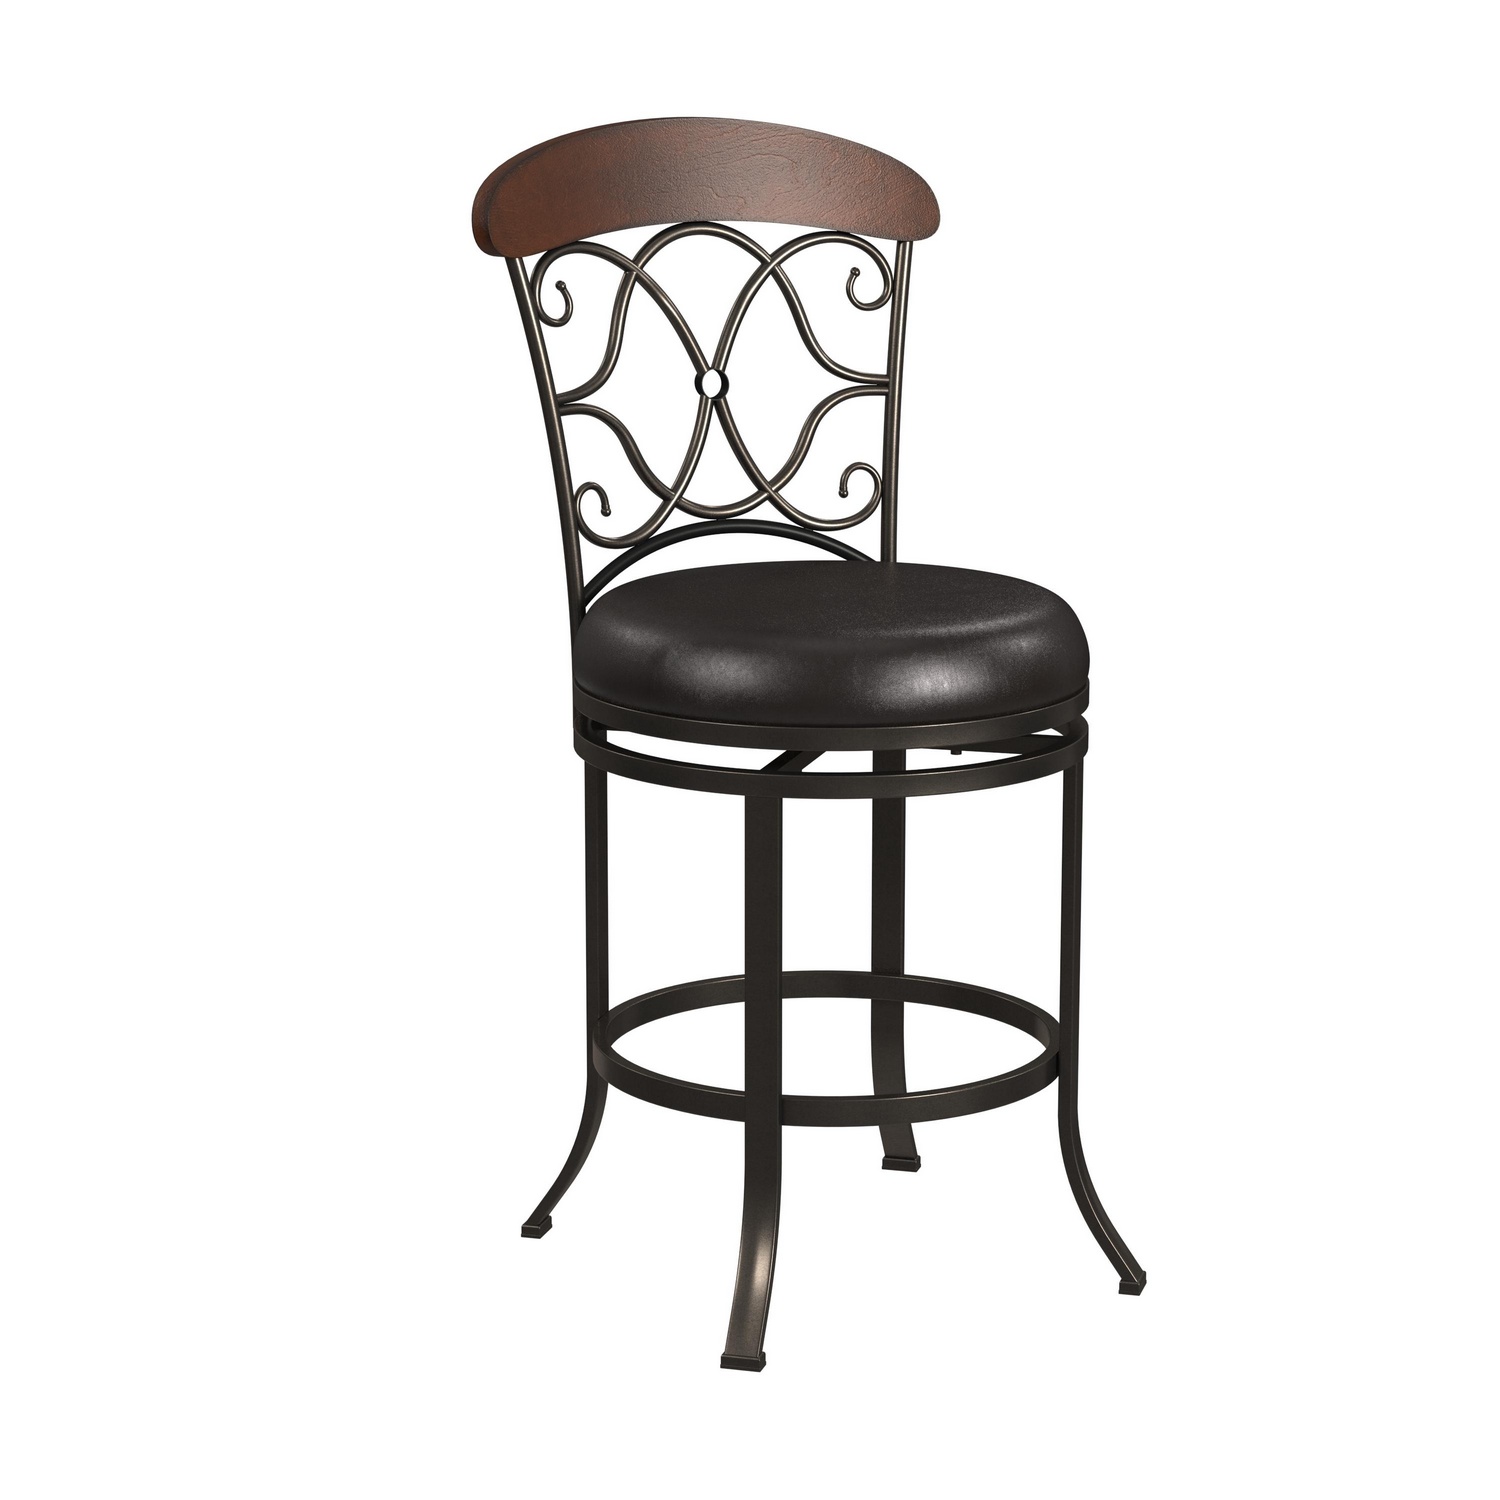 Hillsdale Dundee Commercial Grade Metal Counter Height Swivel Stool - Dark Coffee